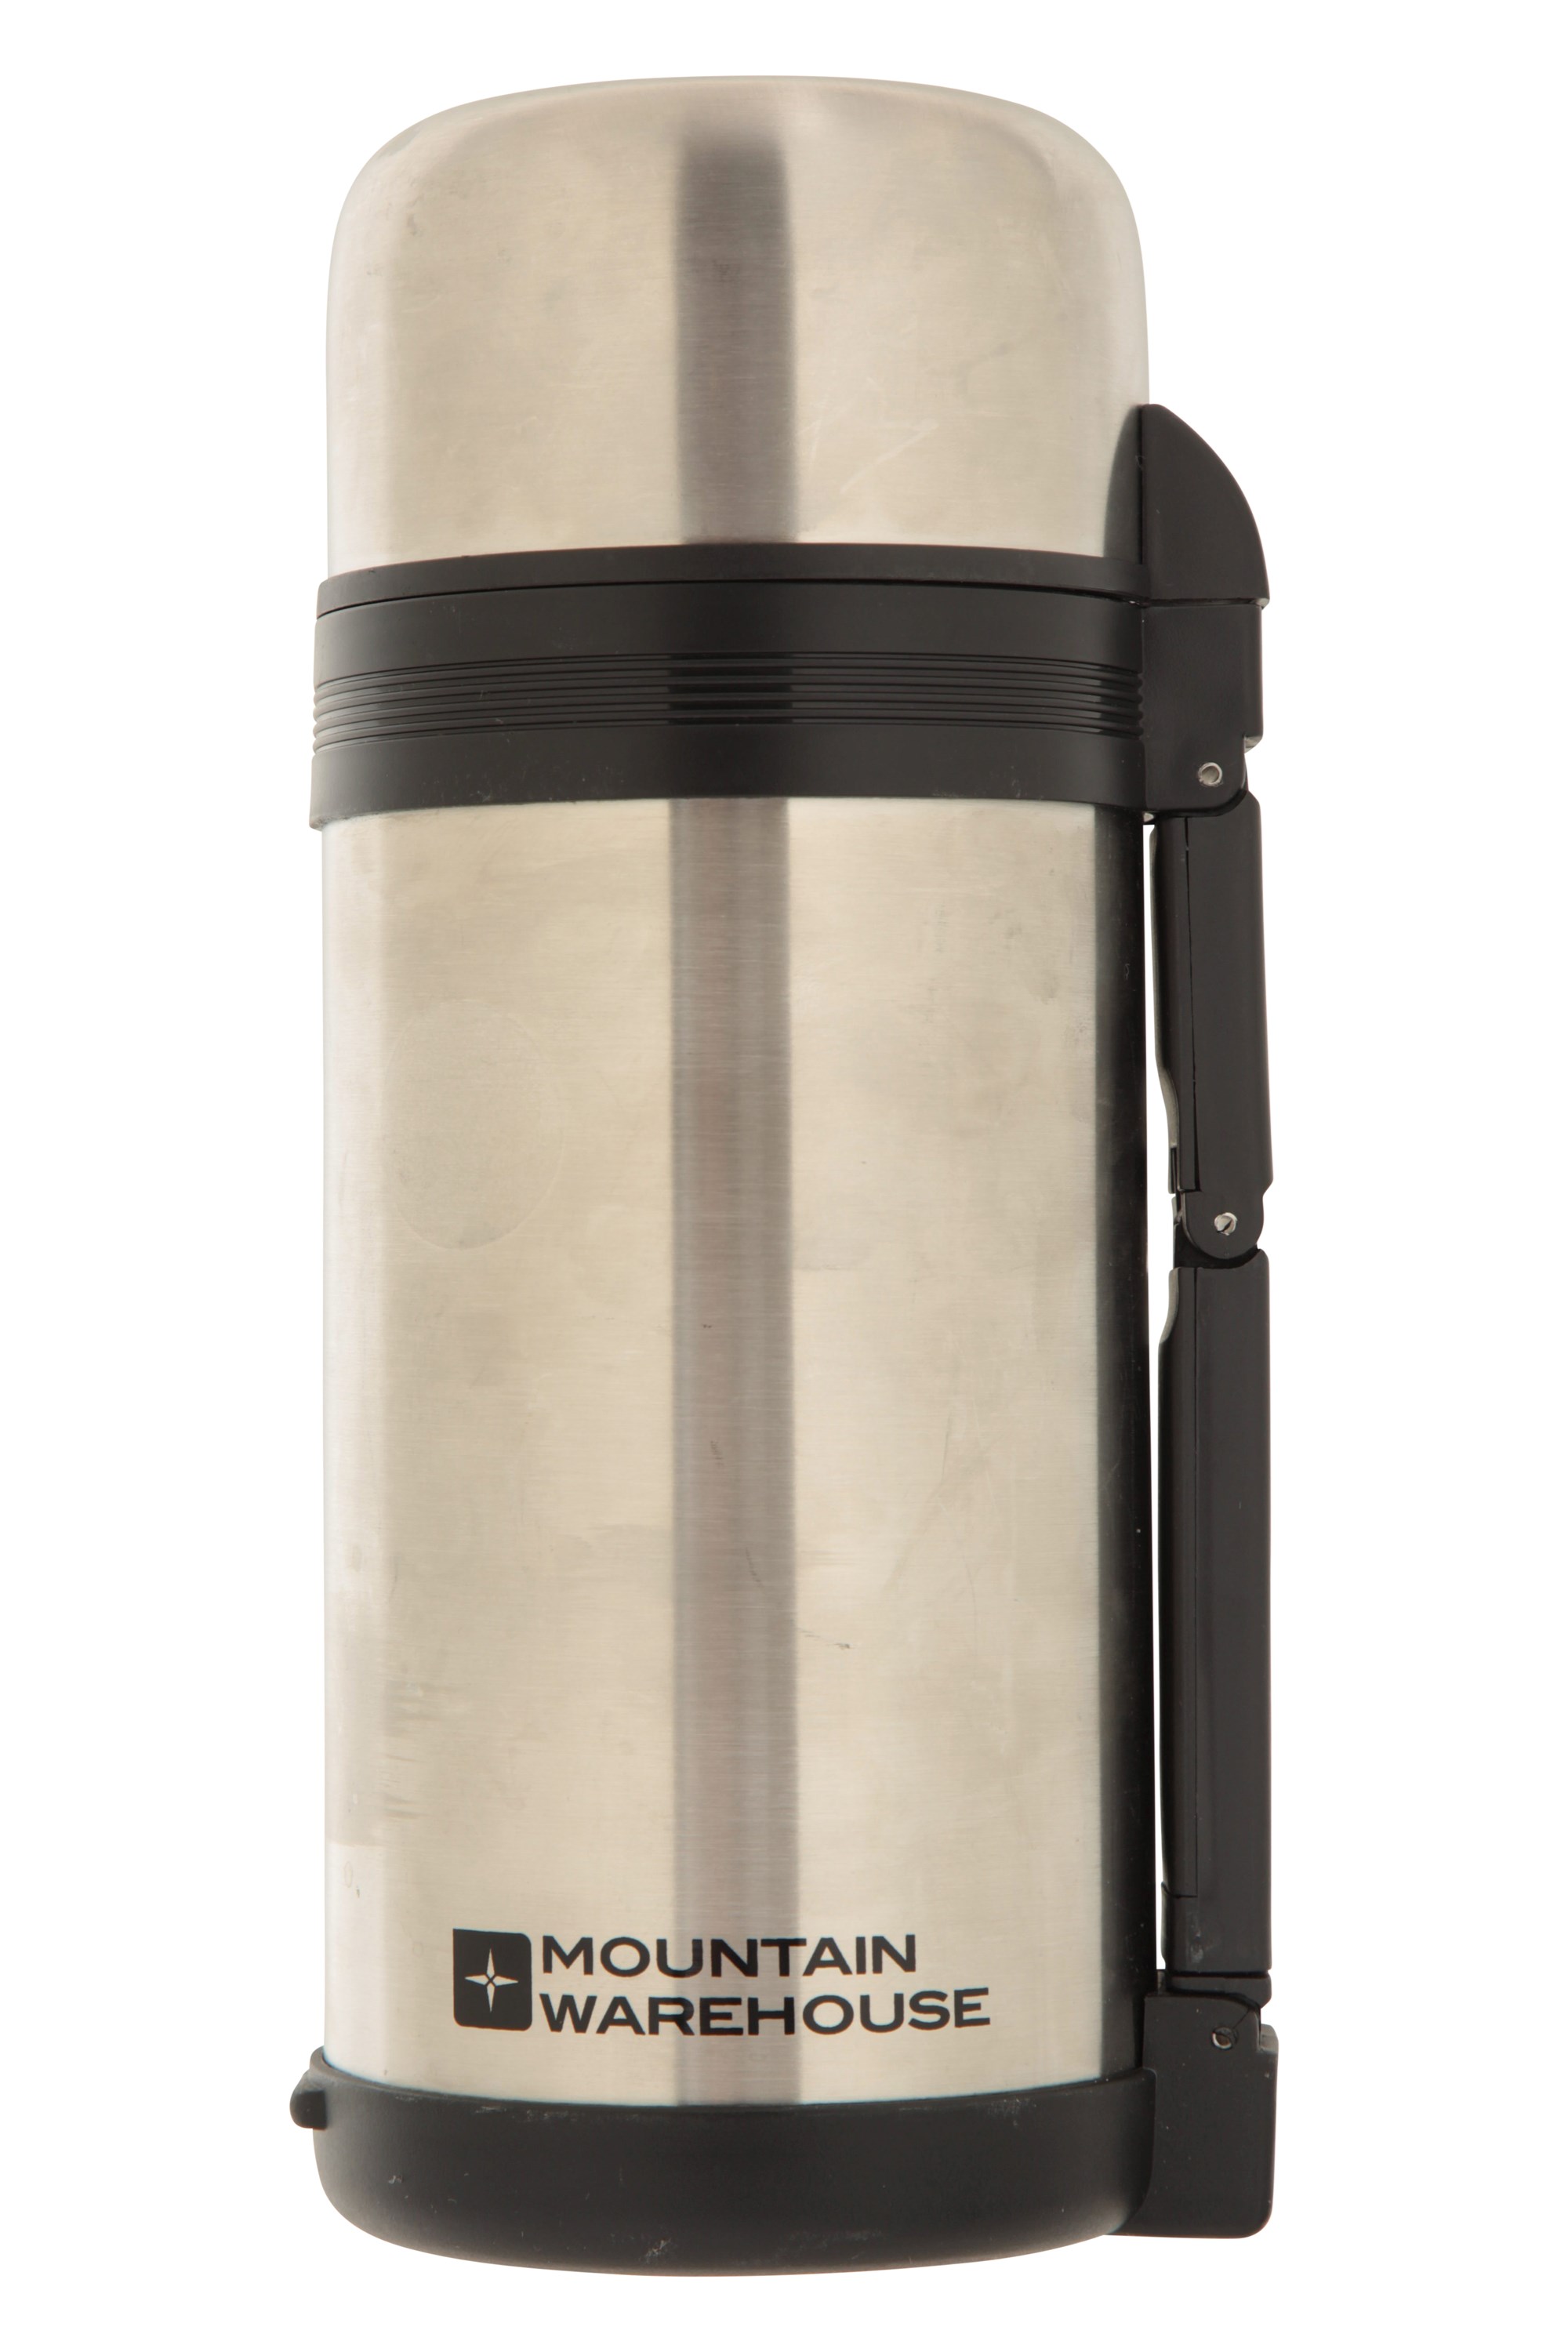 Custom 1L Large Capacity Thermos with 2 Cups Glass Lined Flask for Hiking -  Golmate Enterprise Ltd